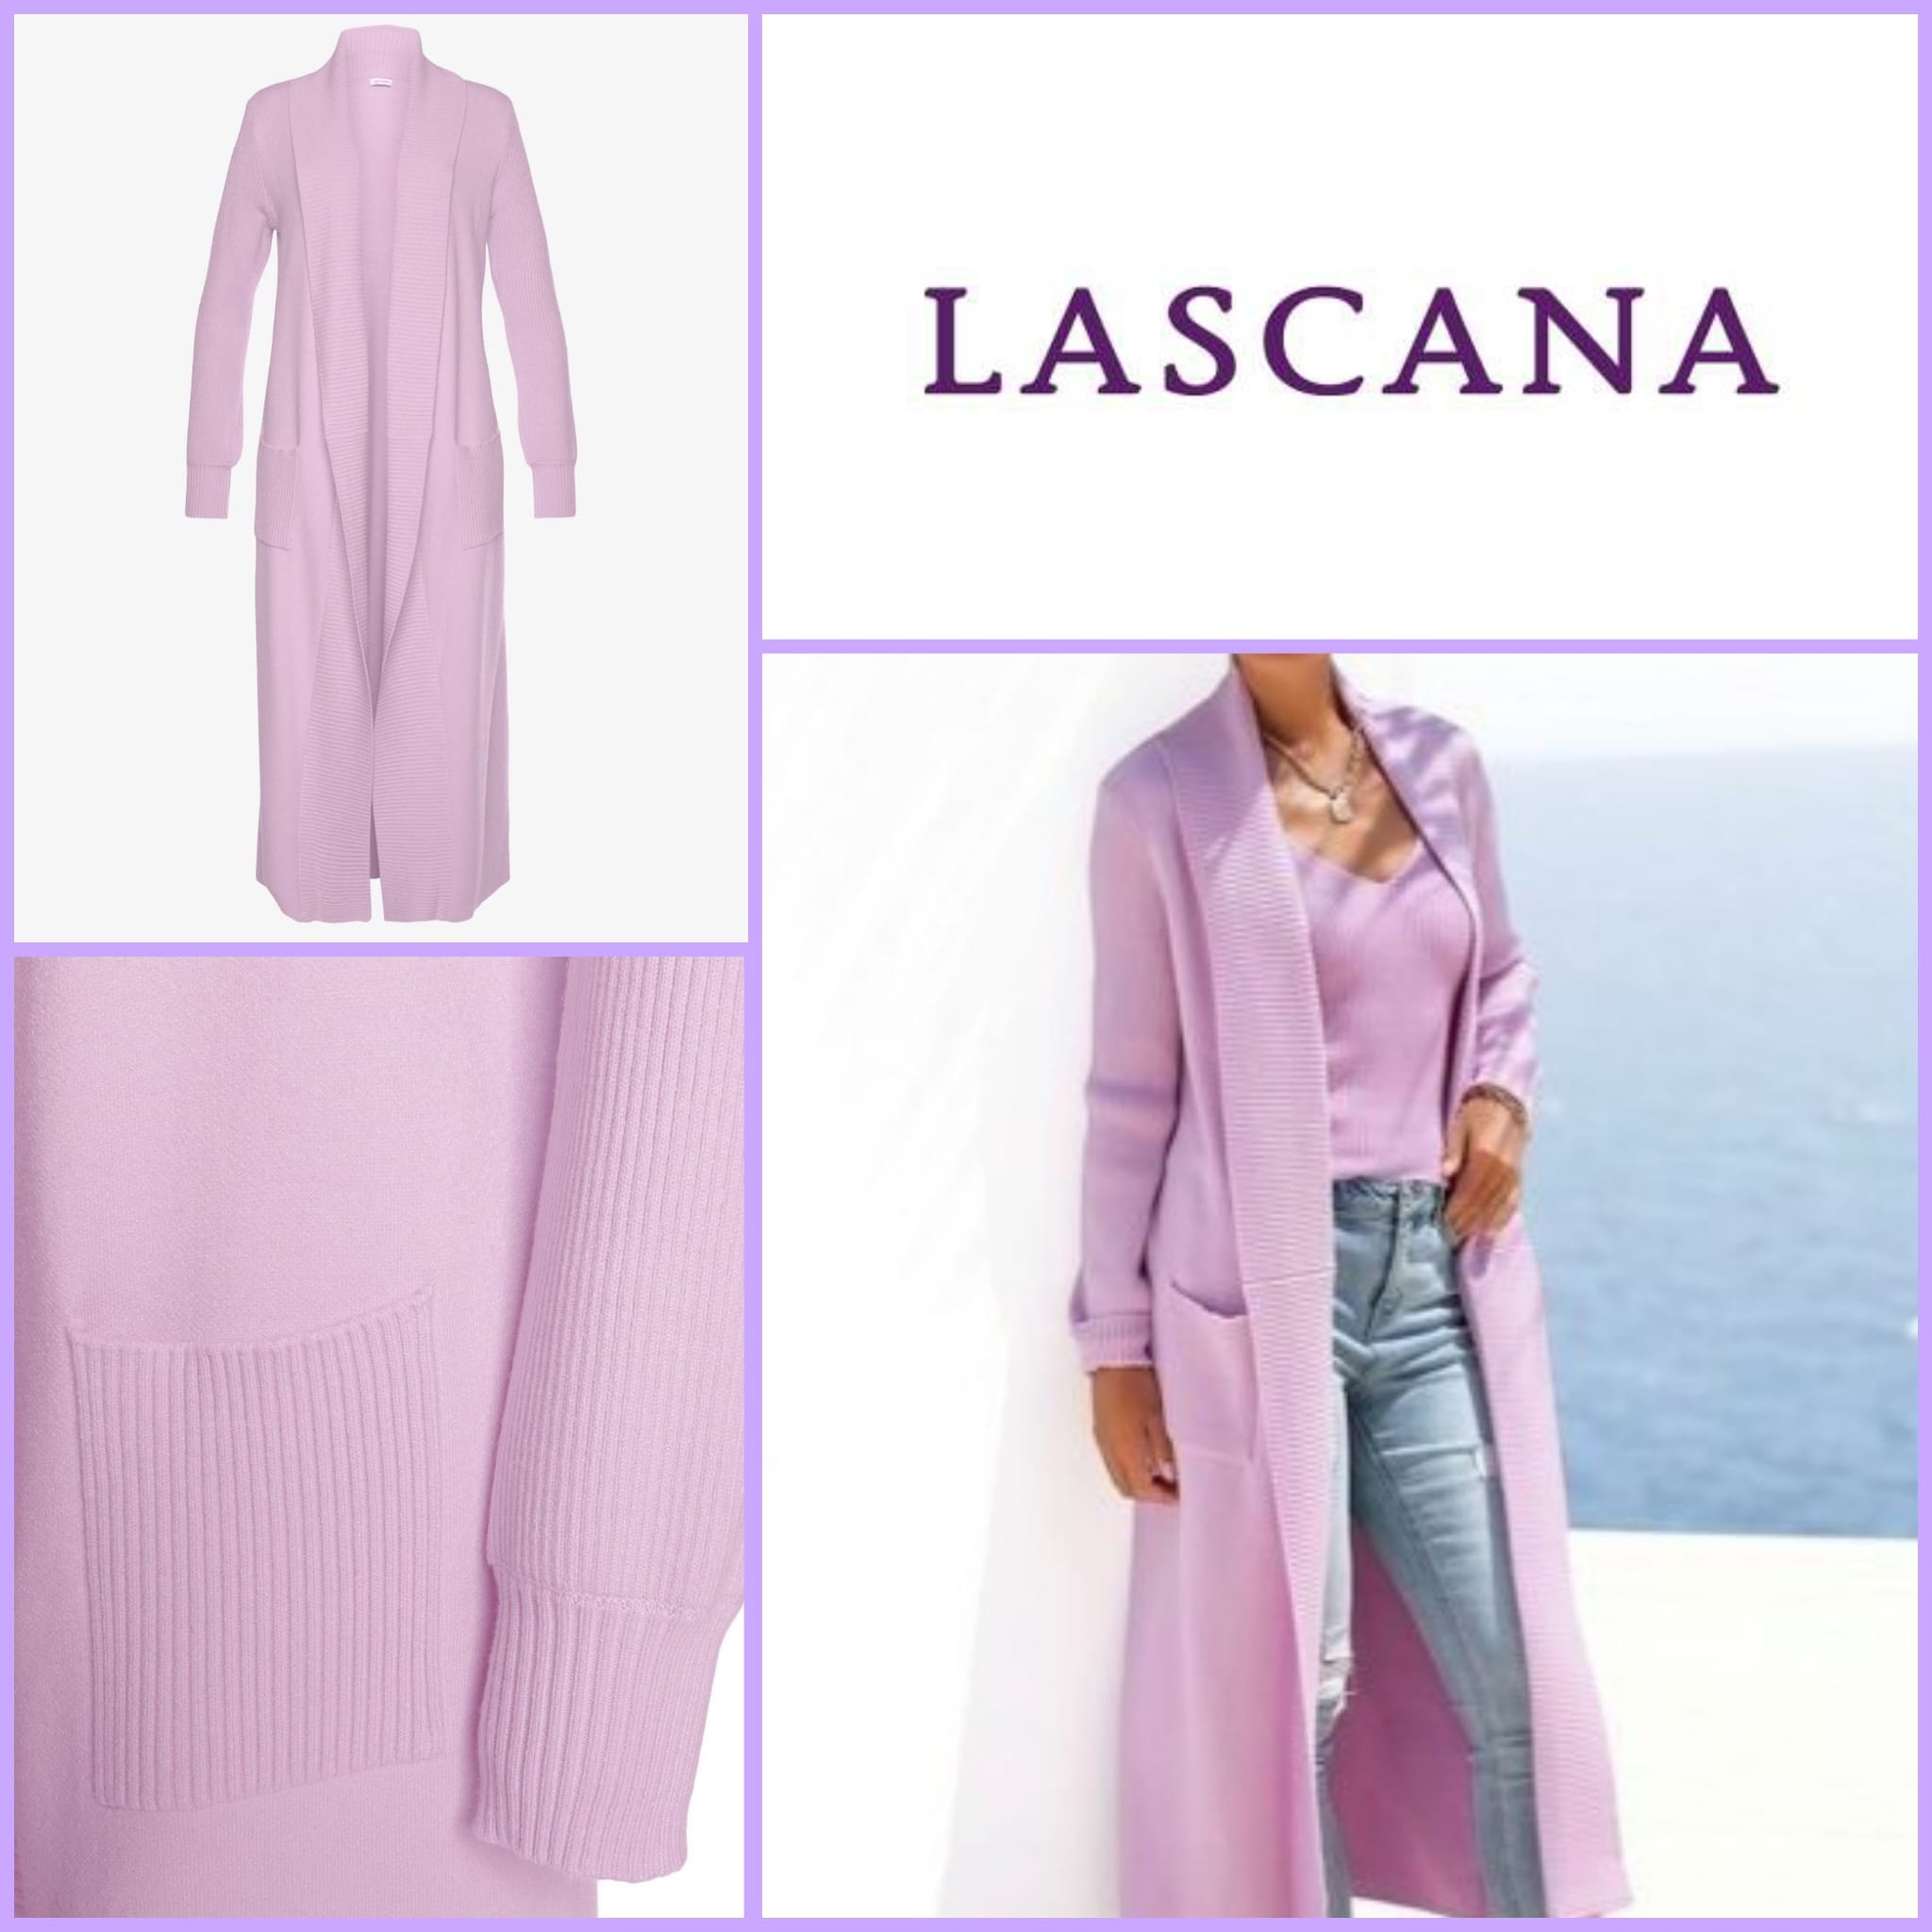 Women's knitted cardigan from Lascana